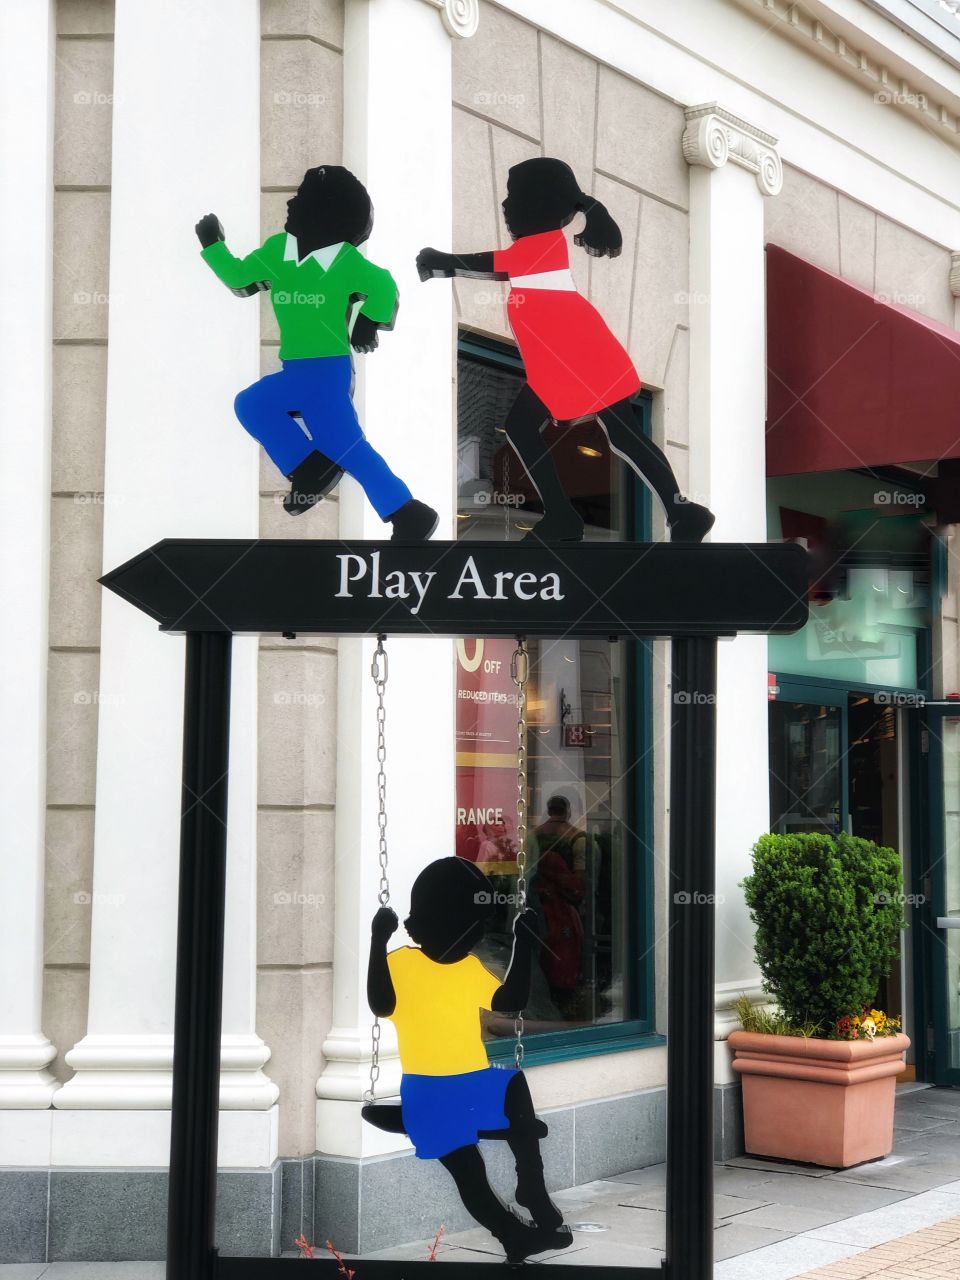 Play area 